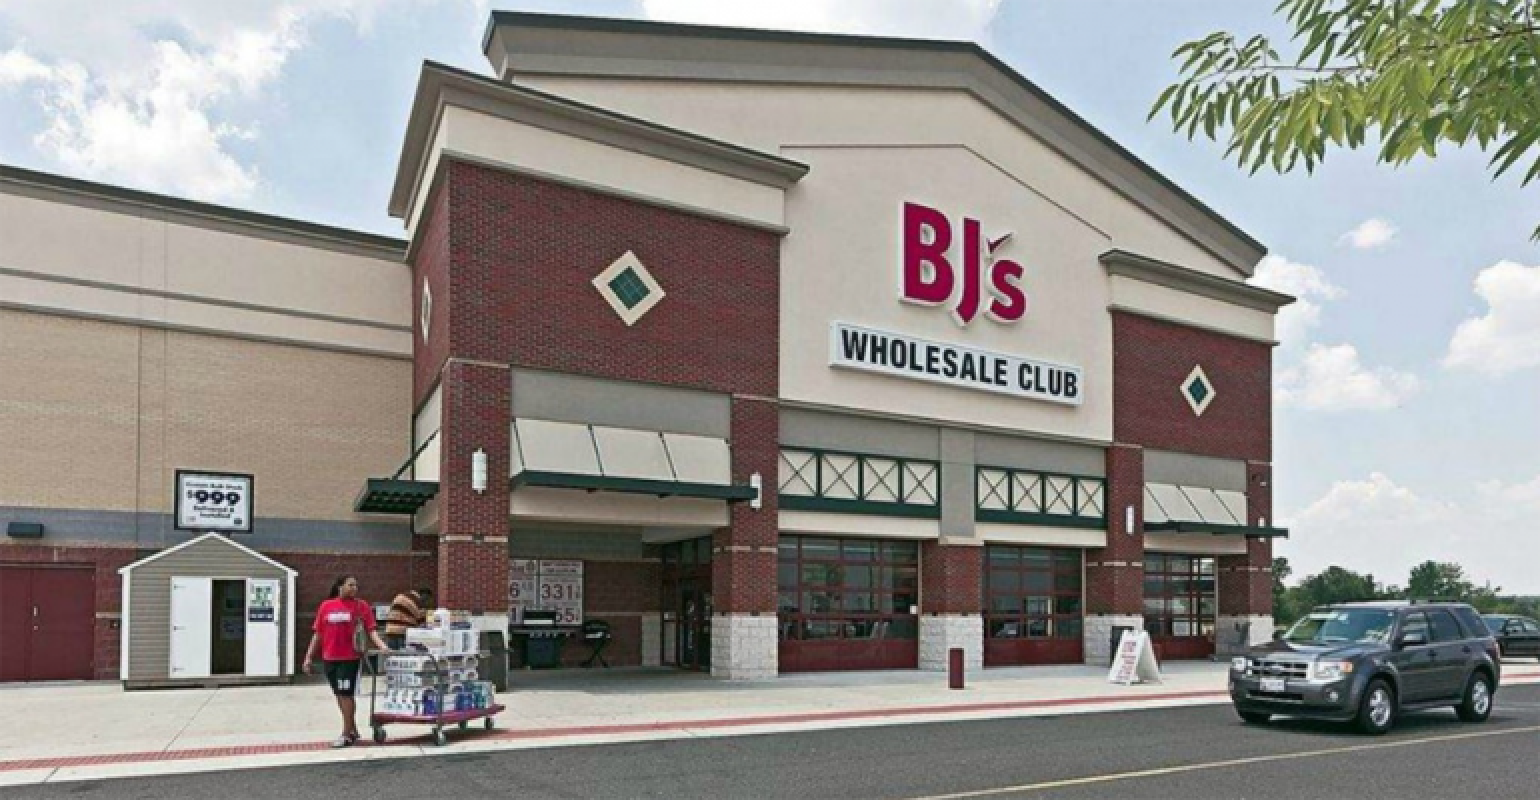 BJ's Wholesale Club - 3 Months Free Promo - wide 5